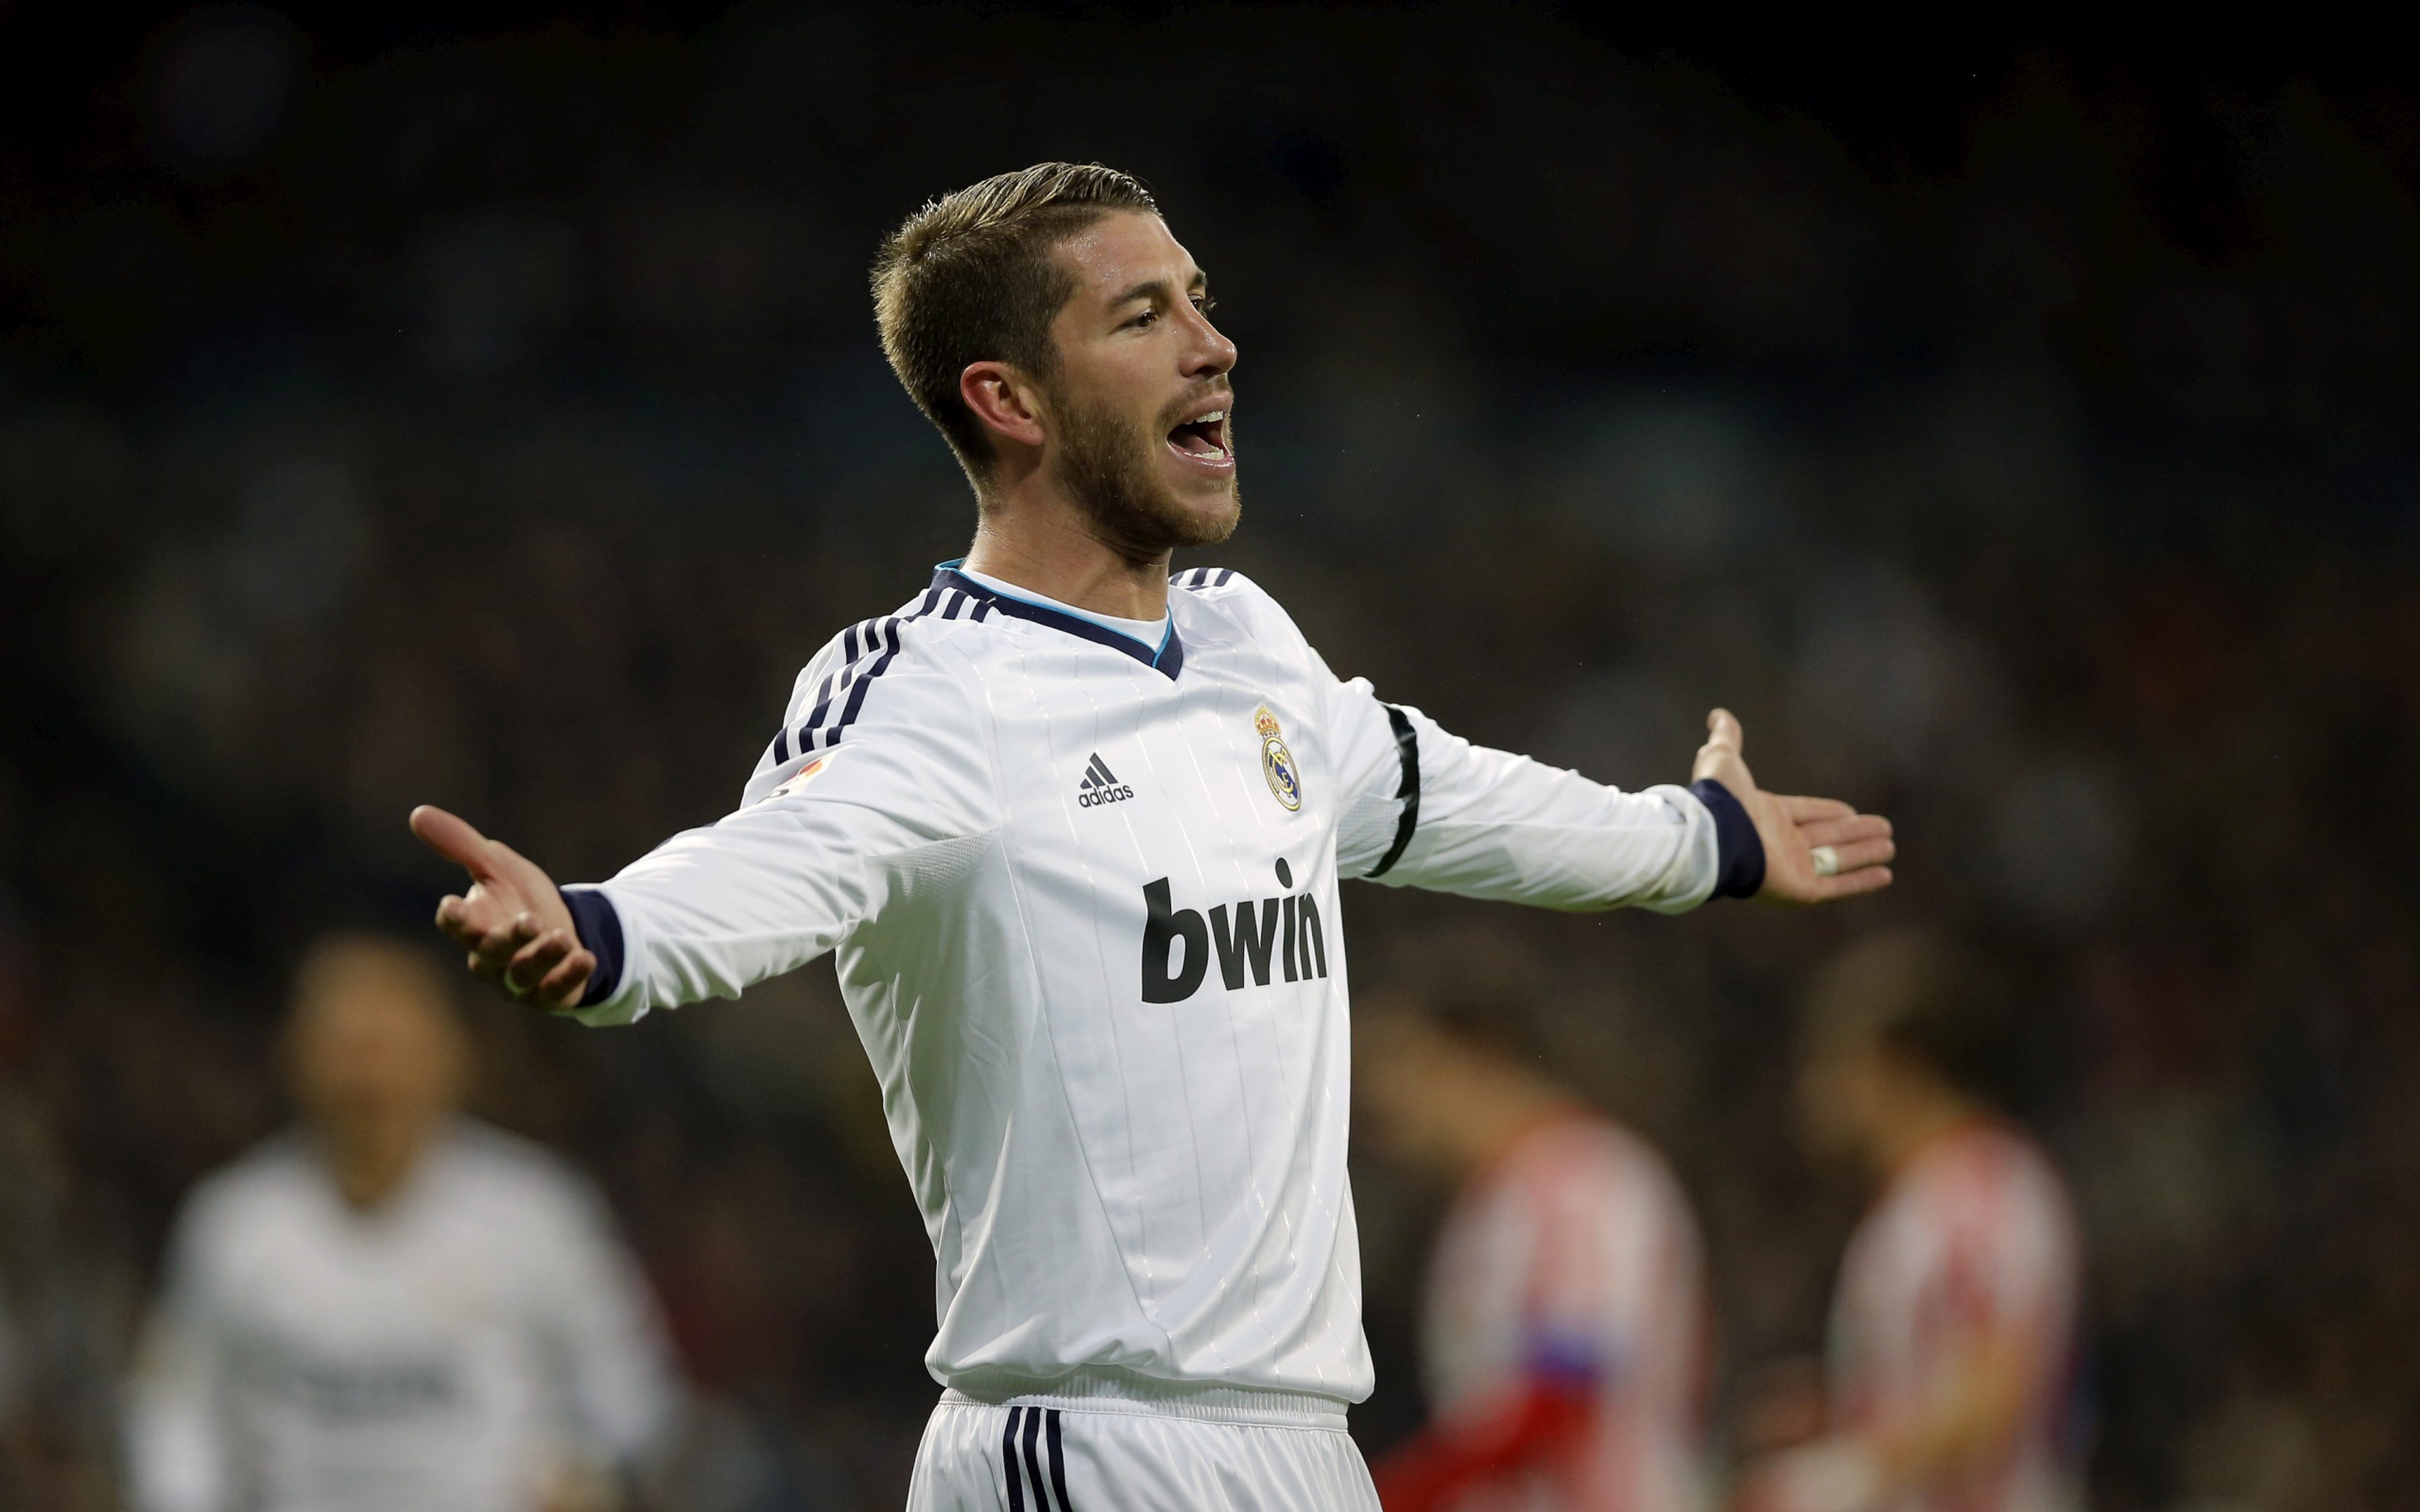 Real Madrid Sergio Ramos is thanking his fans